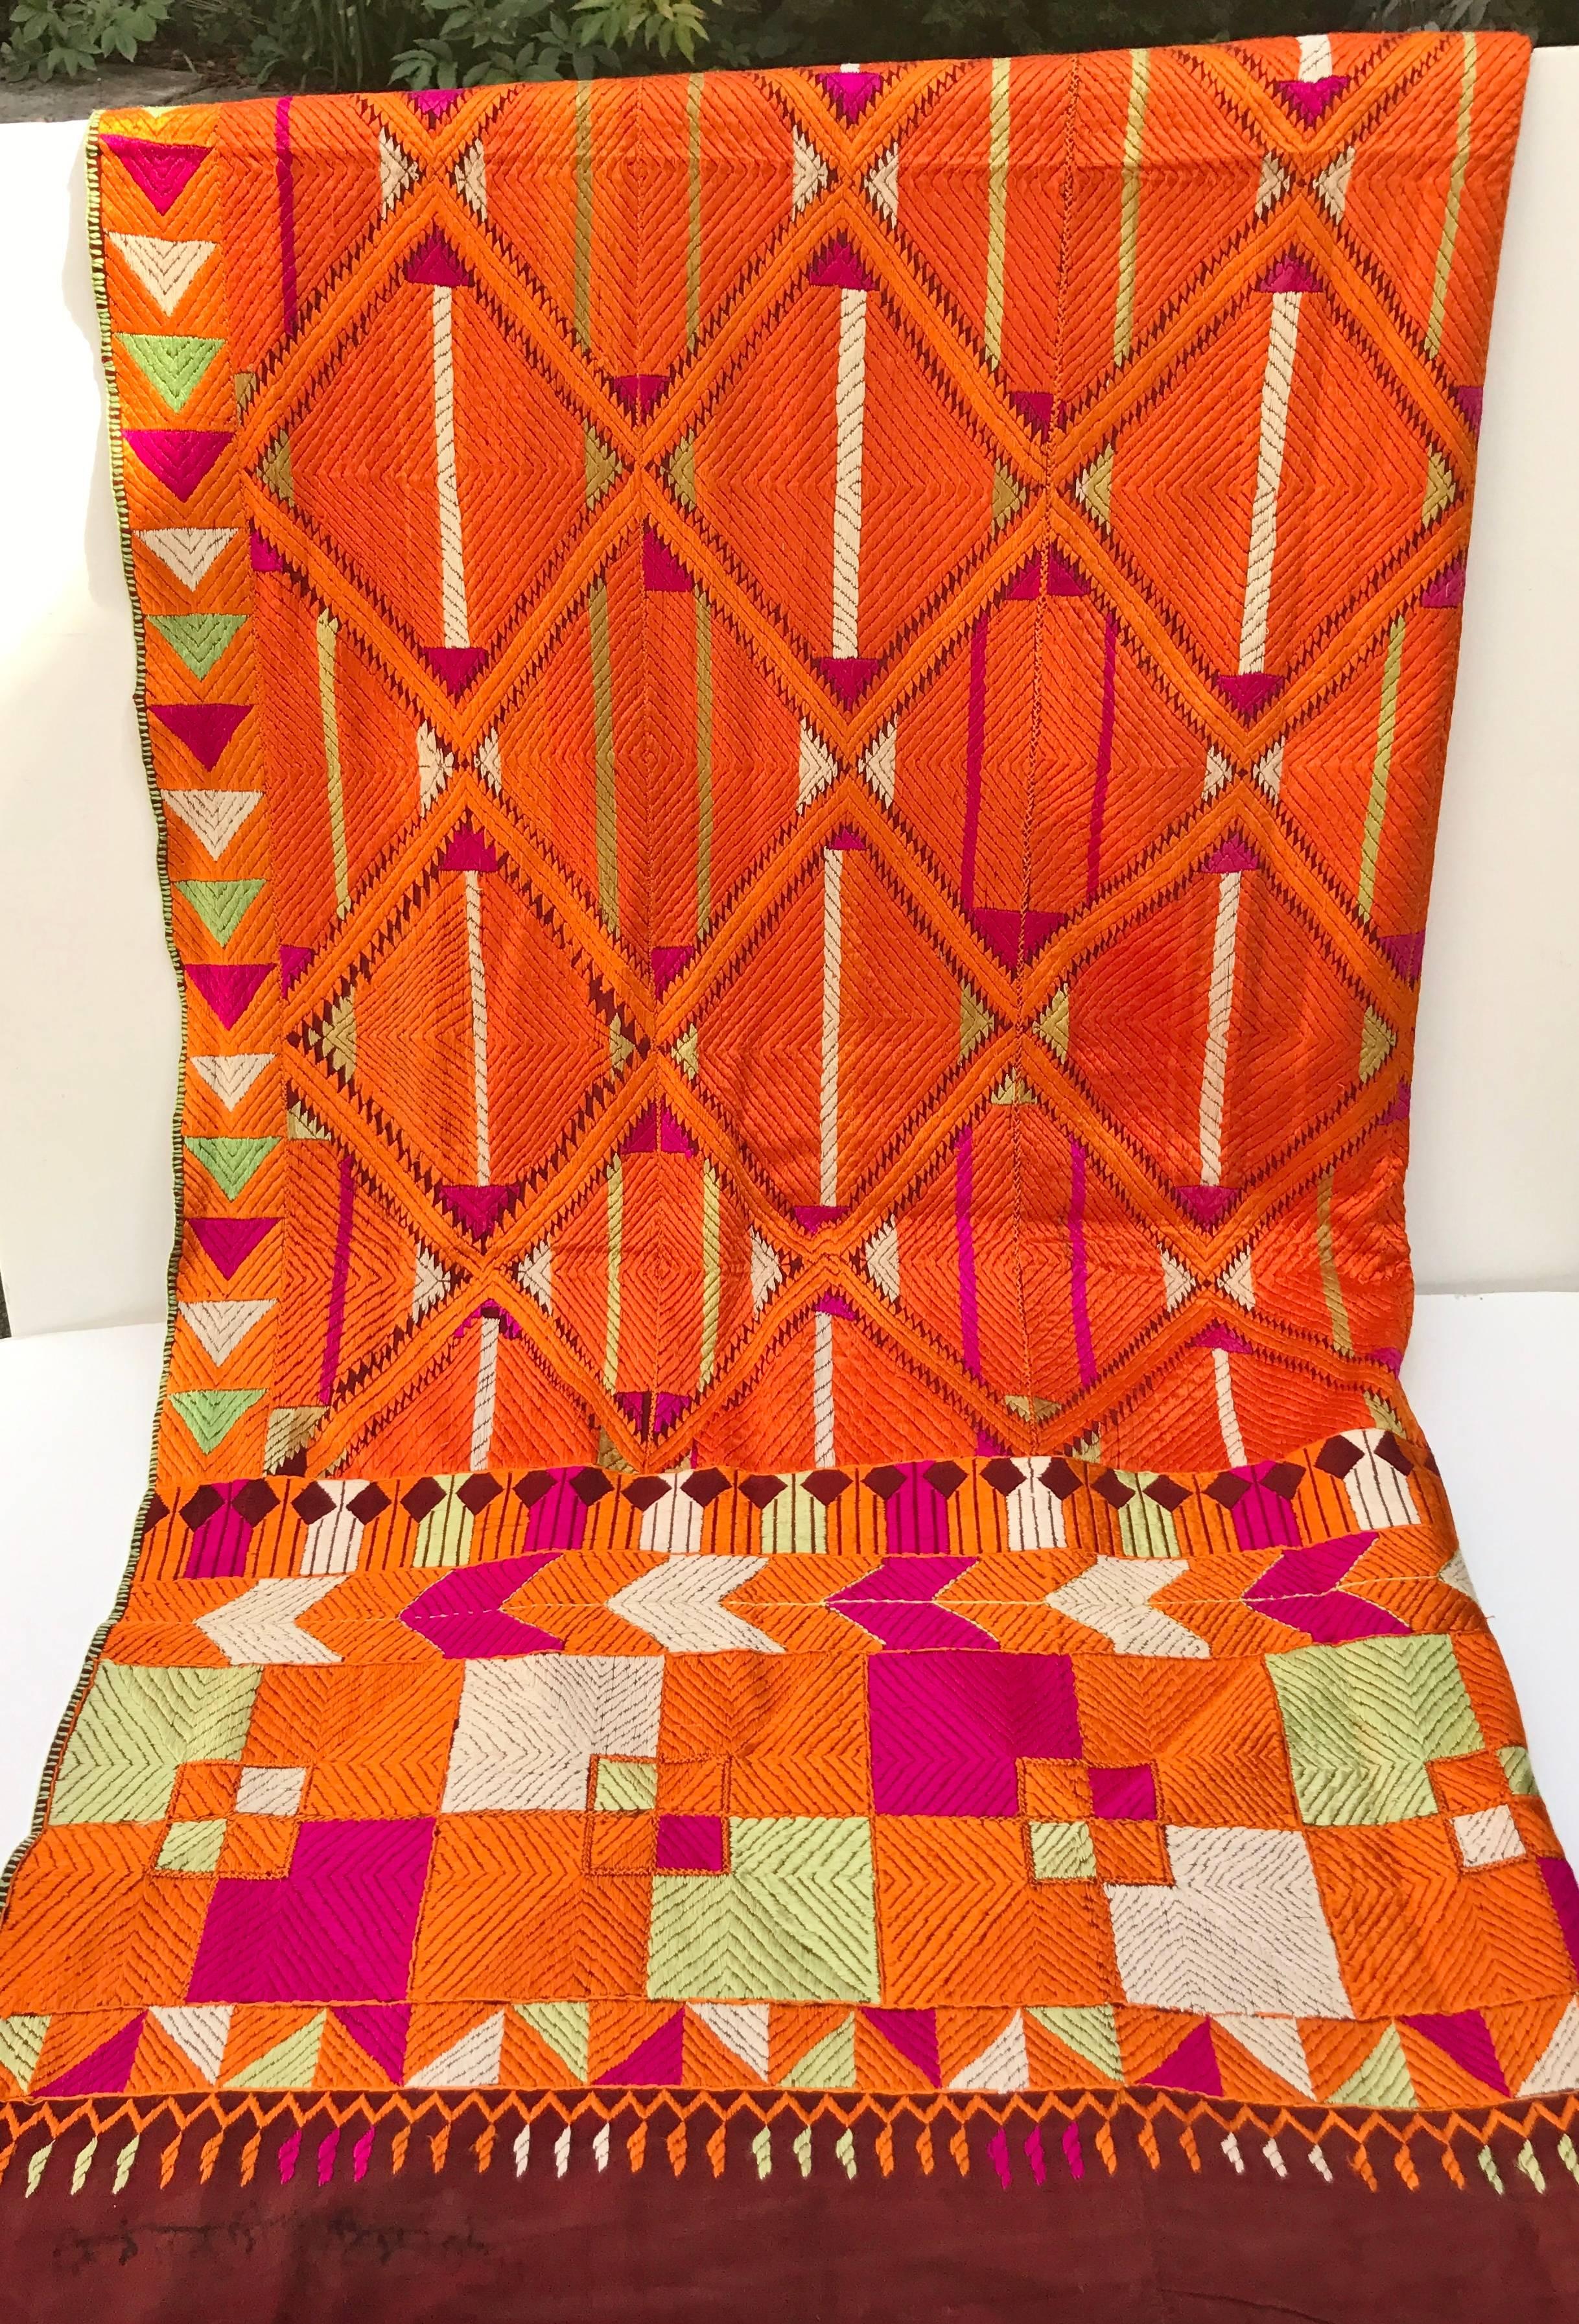 Vintage Phulkari Bagh wedding shawl from Punjab, India. The hand loomed cotton khadi cloth is hand embroidered with vibrant silk threads by members of the young girl's family for her wedding. A lost art, one of a kind, wedding gift, folk art,